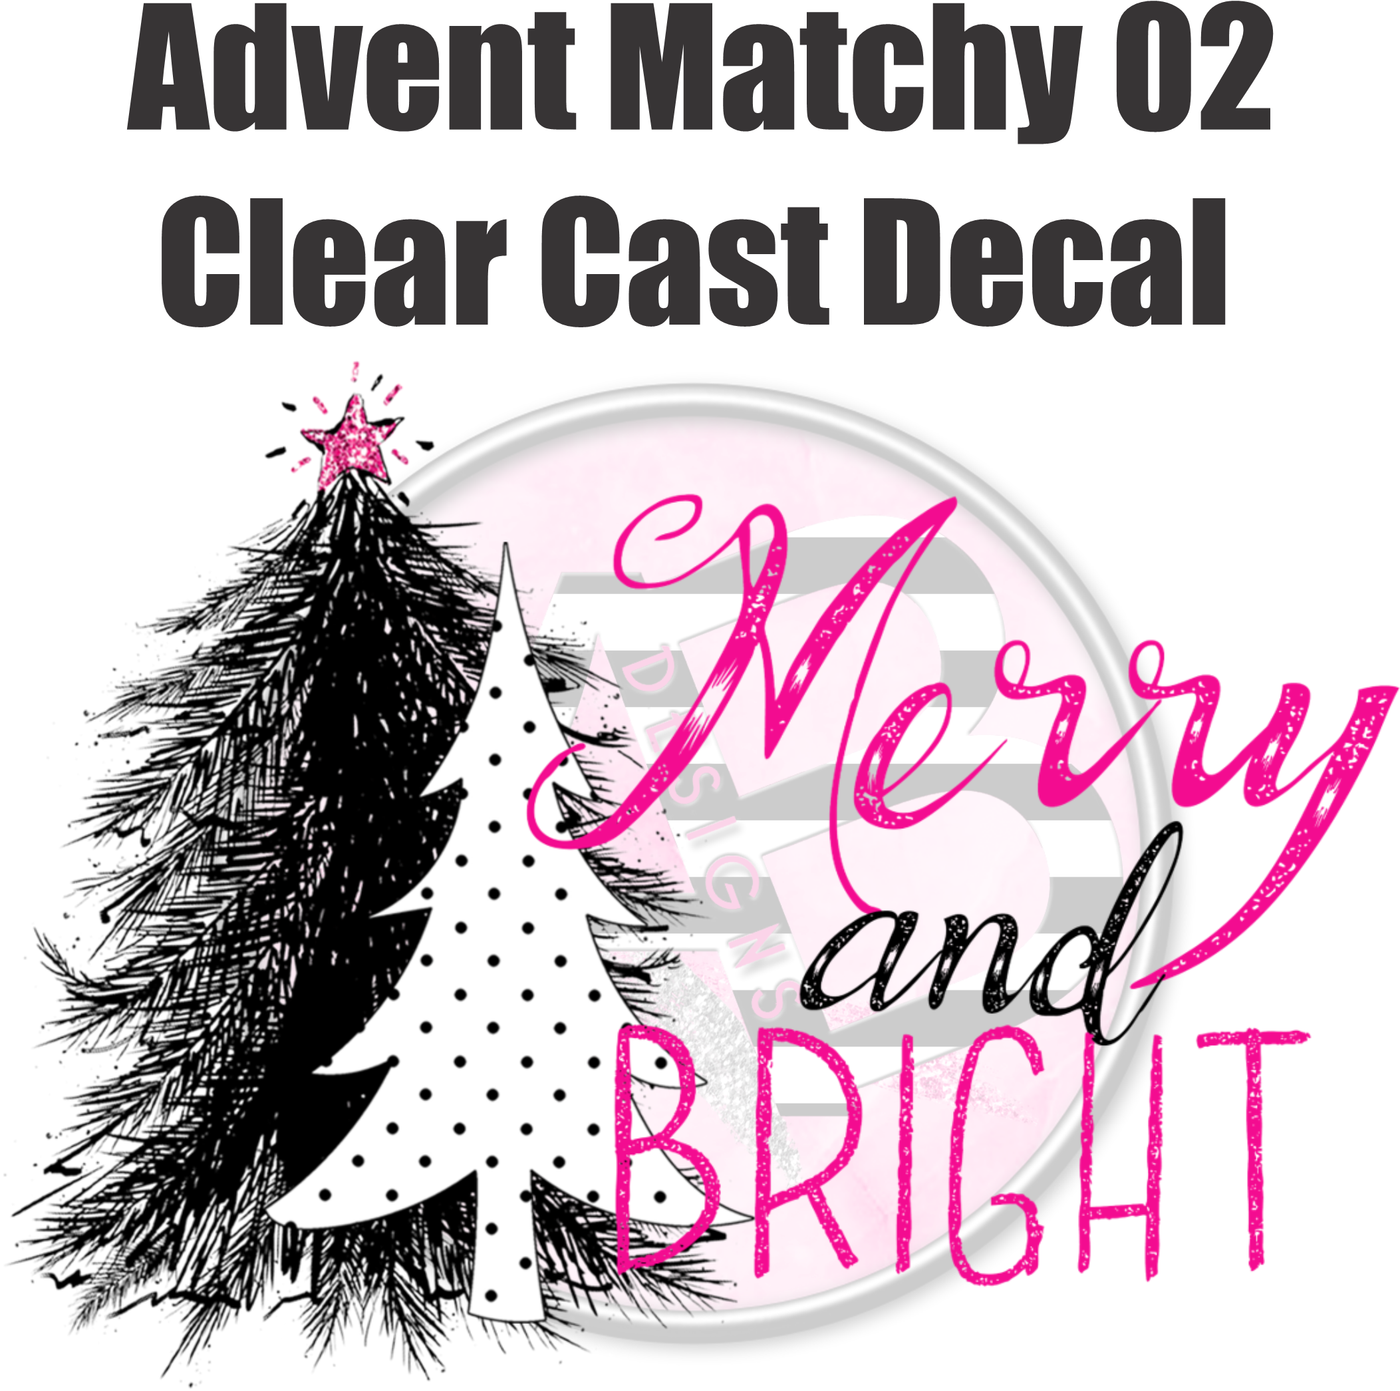 Advent Matchy 02 - Clear Cast Decal